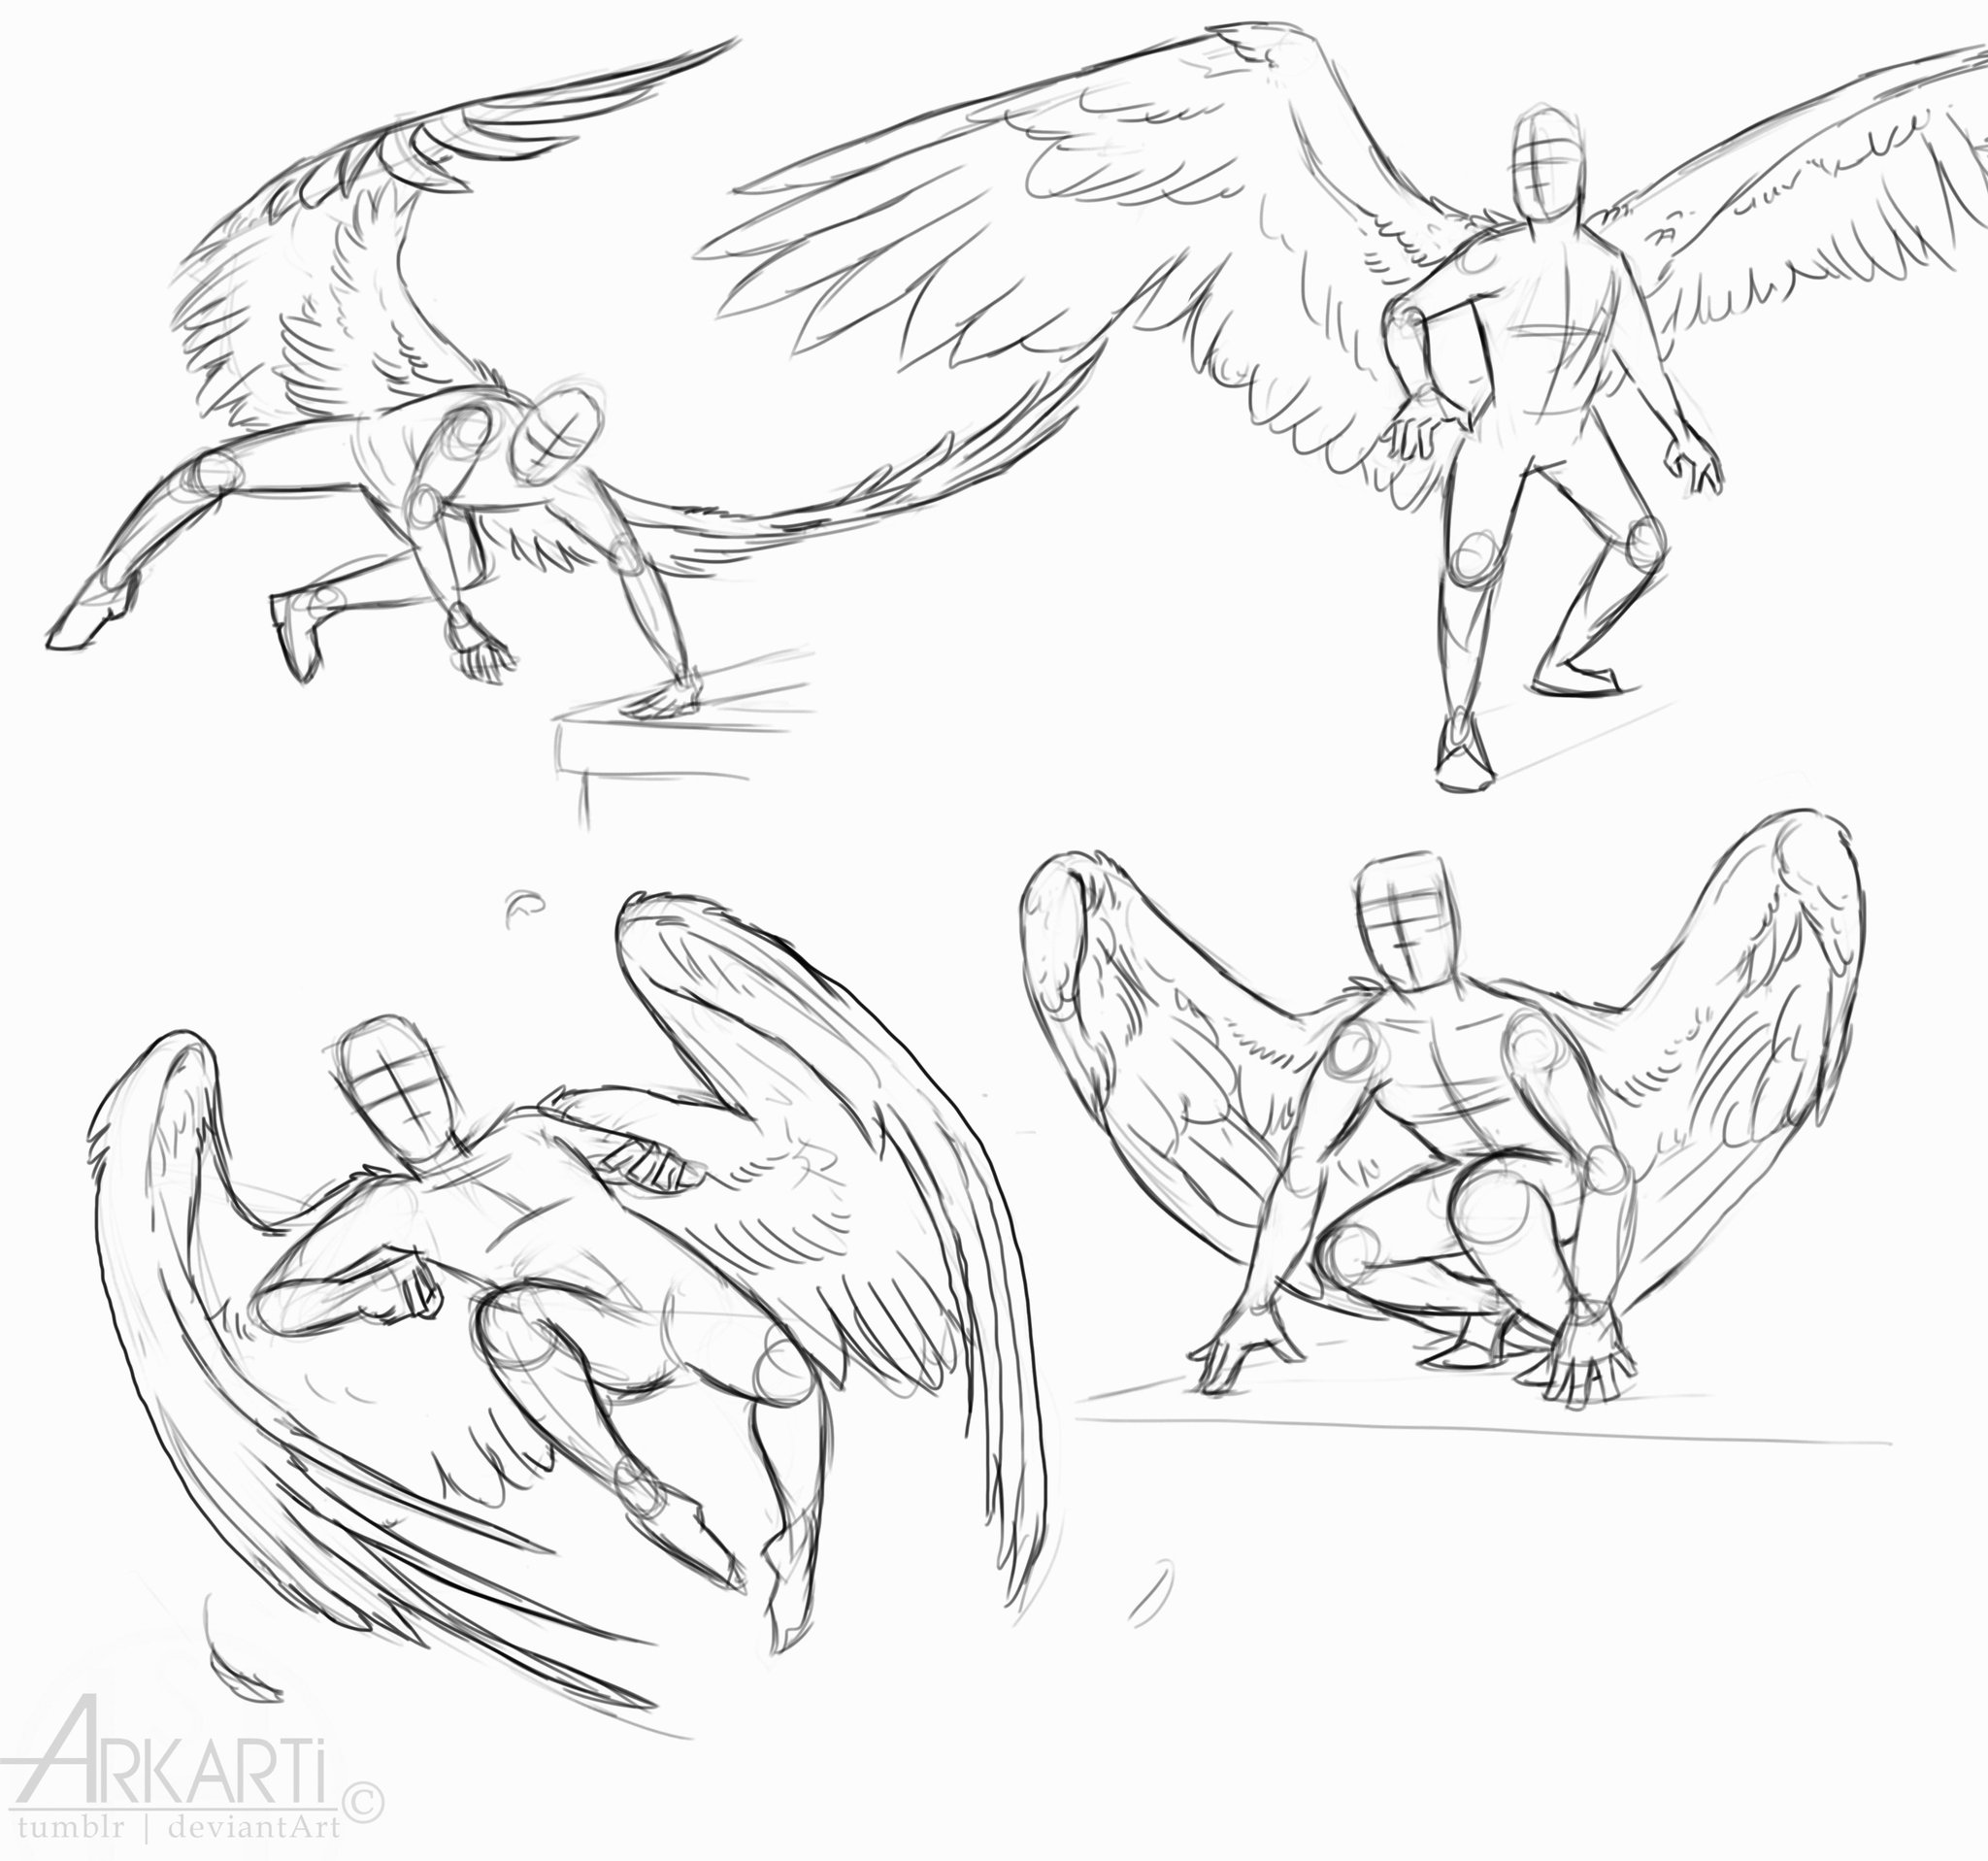 arkarti on Twitter: "Some sketches of dynamic poses + wings #digitalart